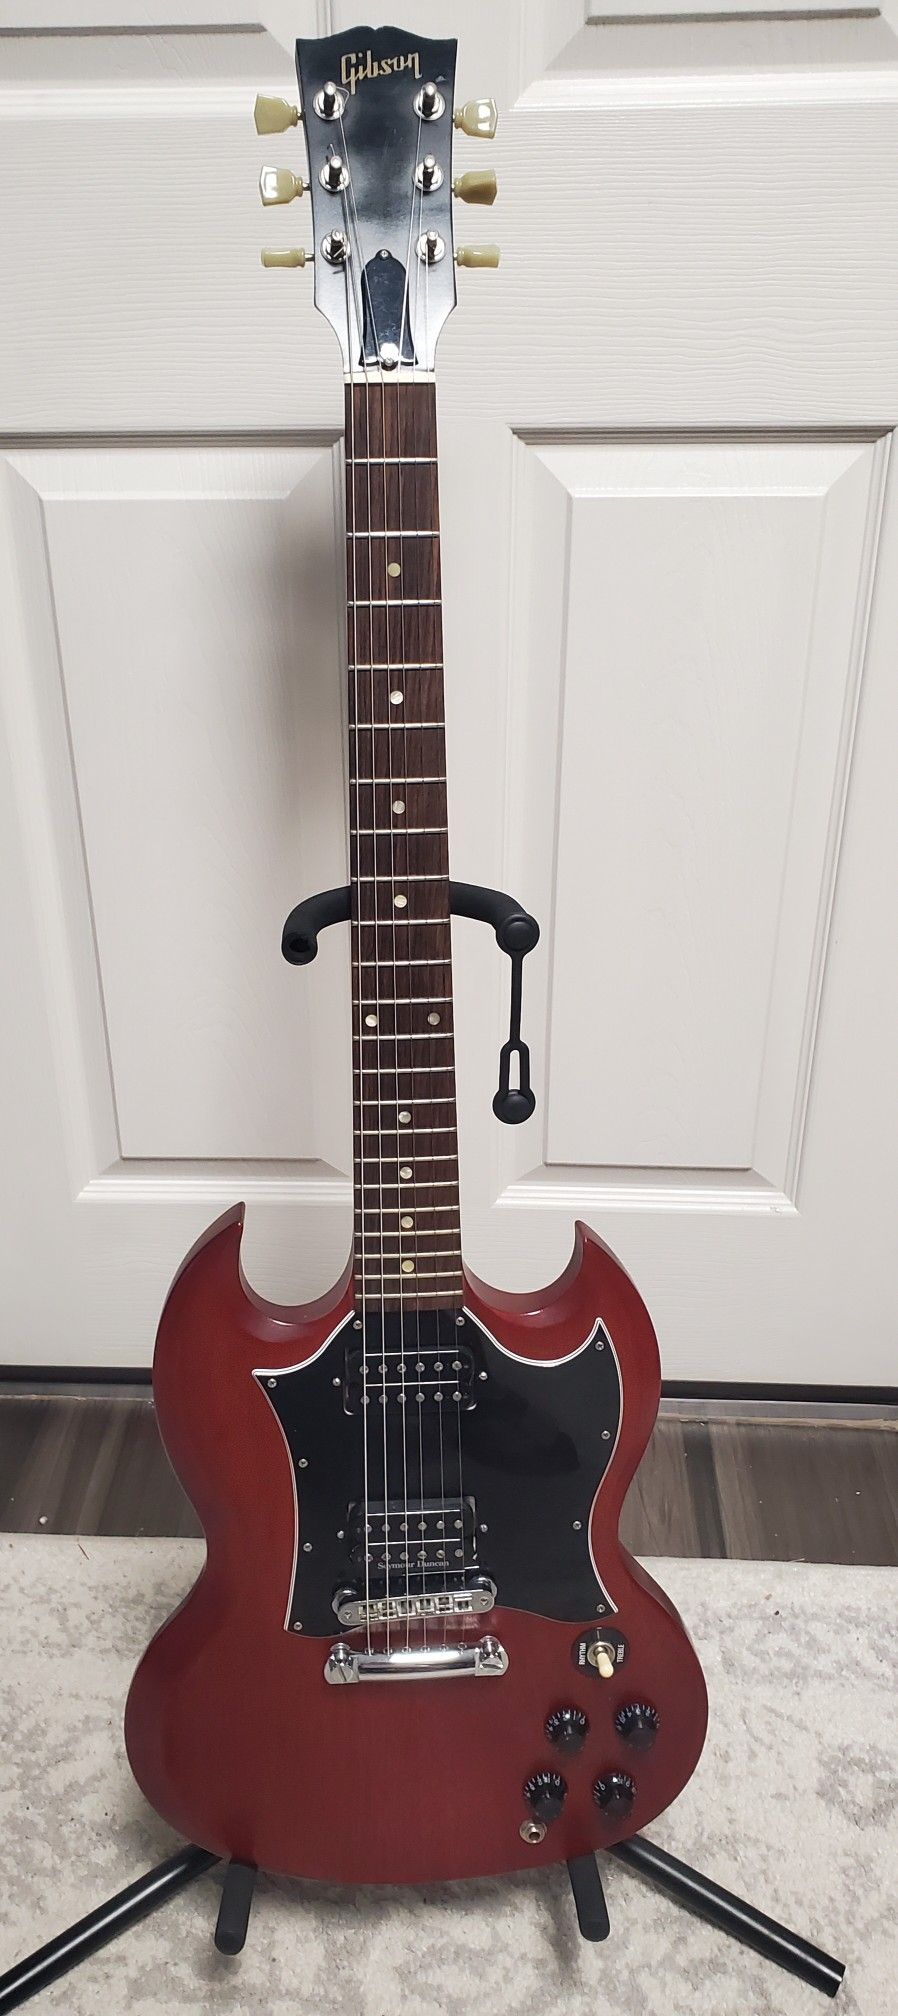 Gibson SG Special Faded with Rosewood Fretboard 2006 - Worn Cherry